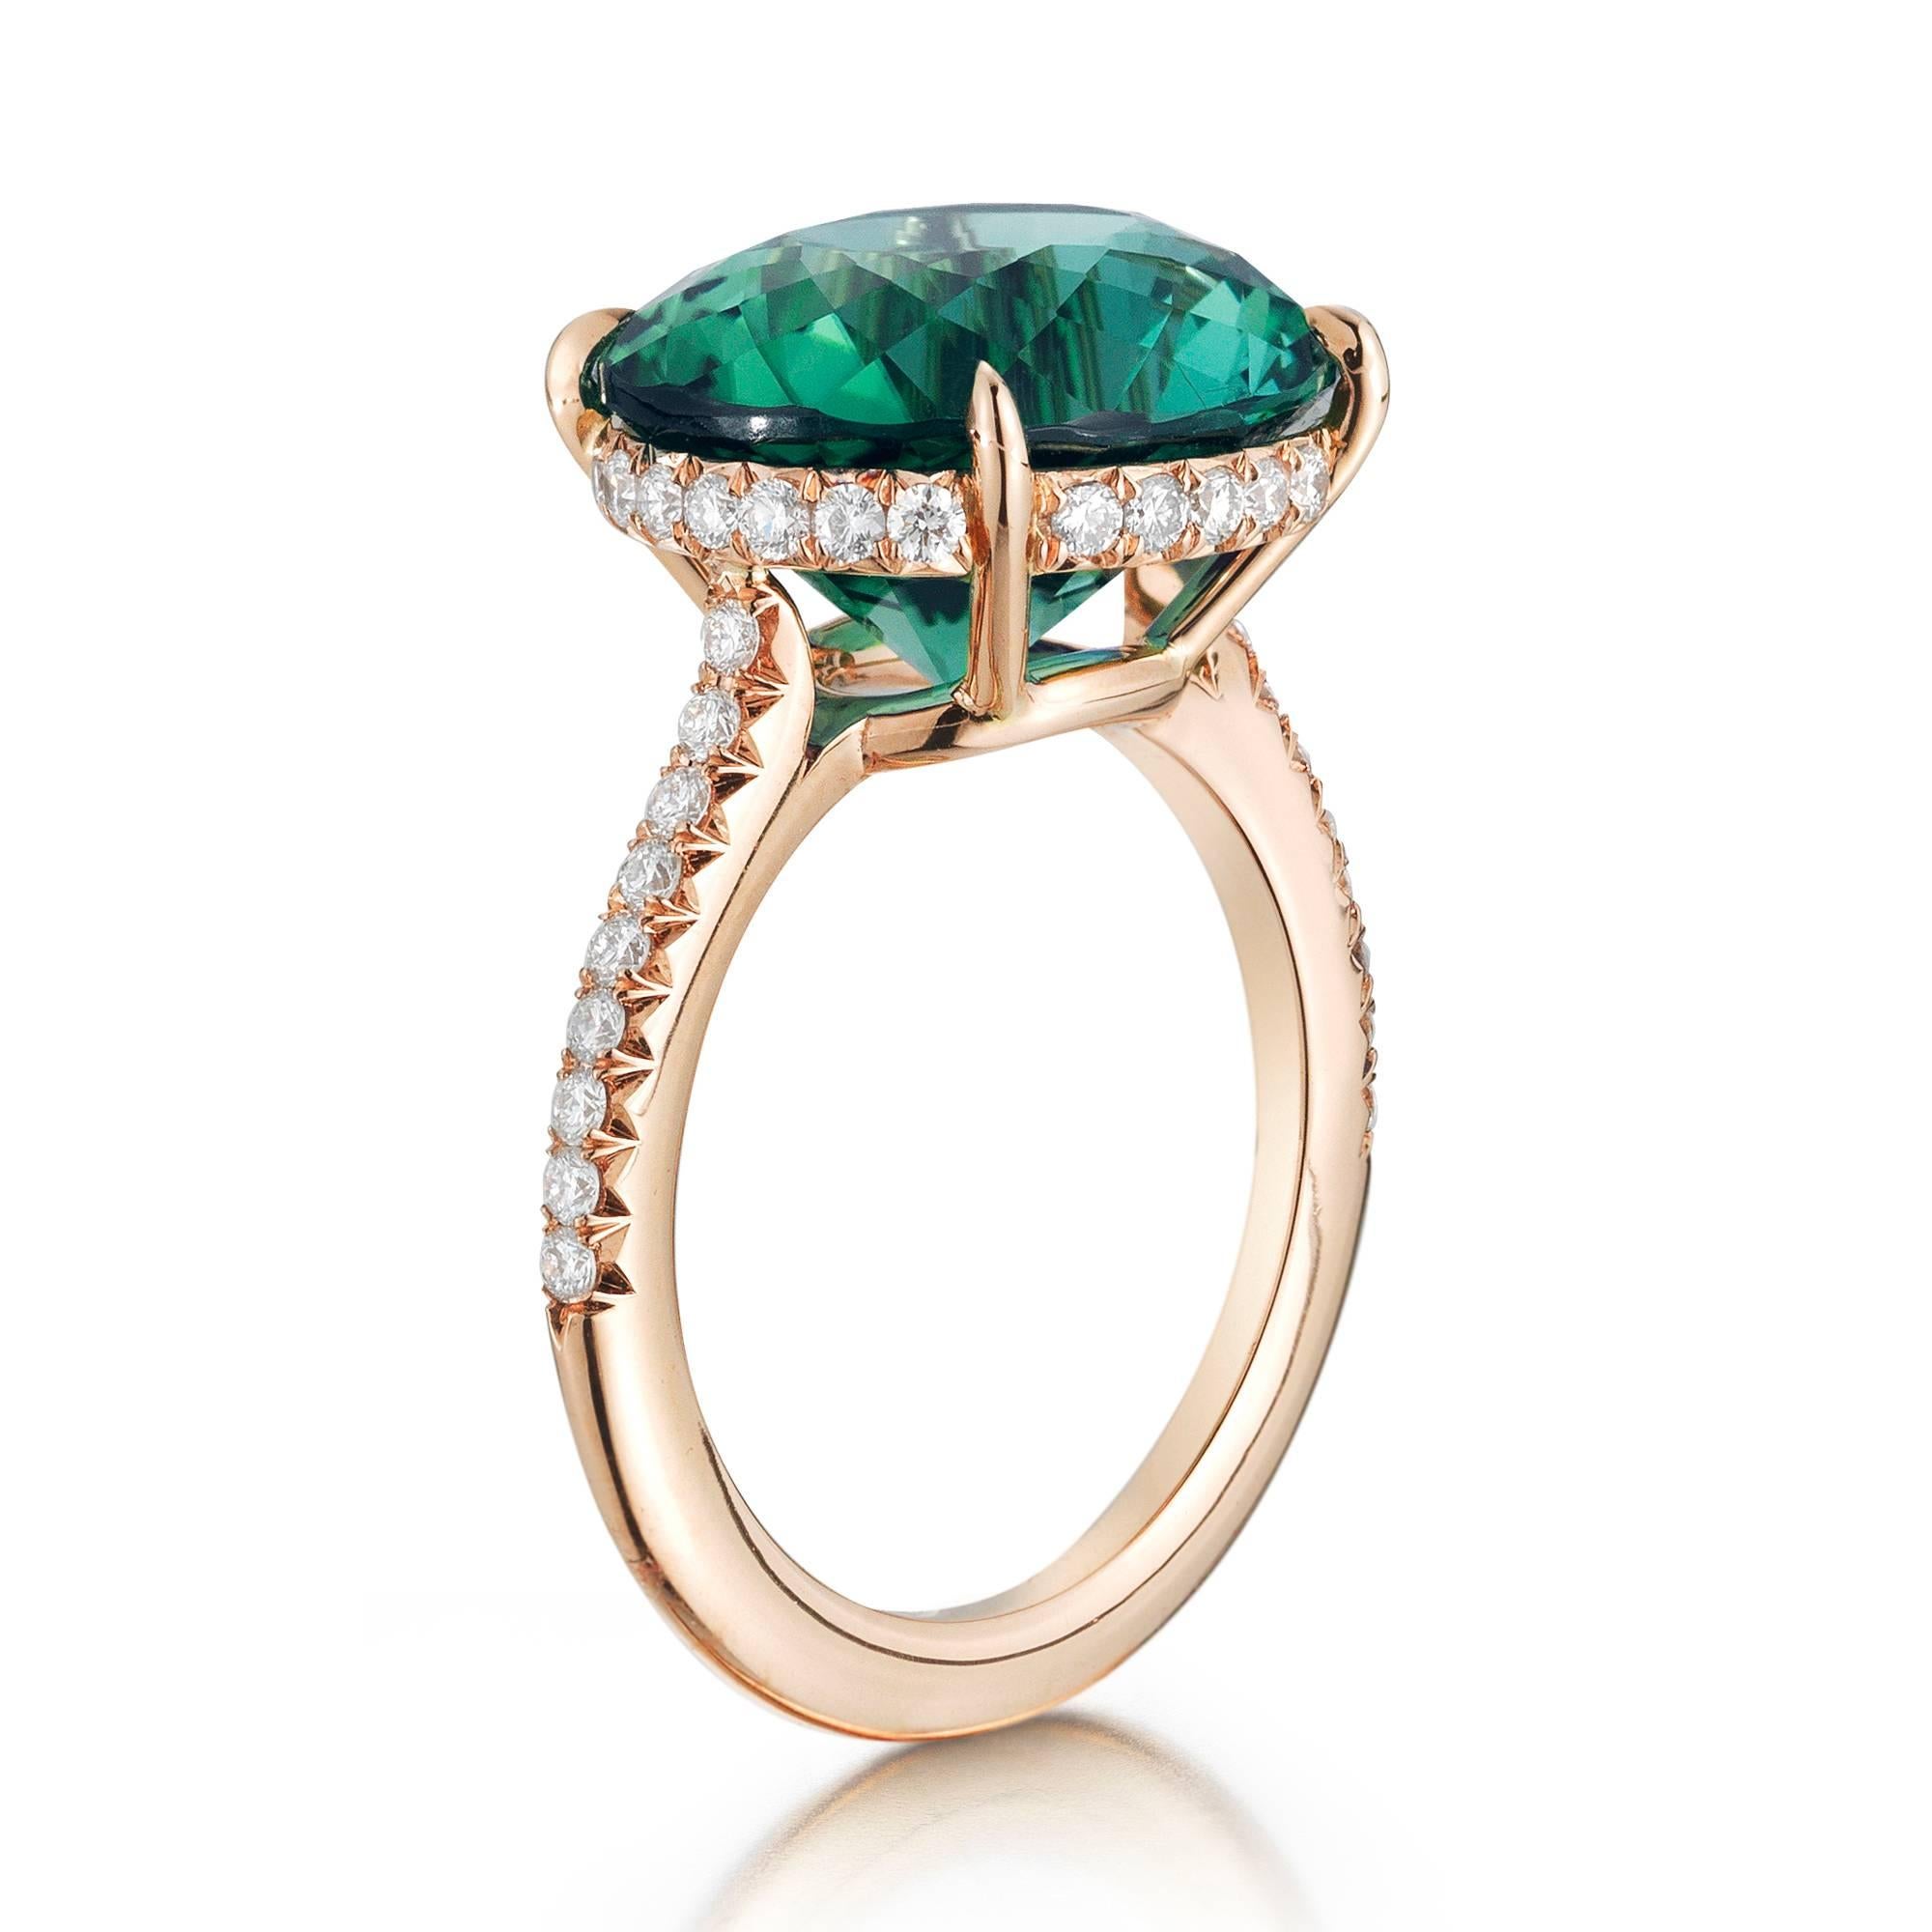 18kt rose gold ring set with an oval green tourmaline with diamond detail.

Each Paolo Costagli contemporary engagement ring is a one of a kind, handcrafted testament to your love story.

The beauty is in the details - from the combination of hues,